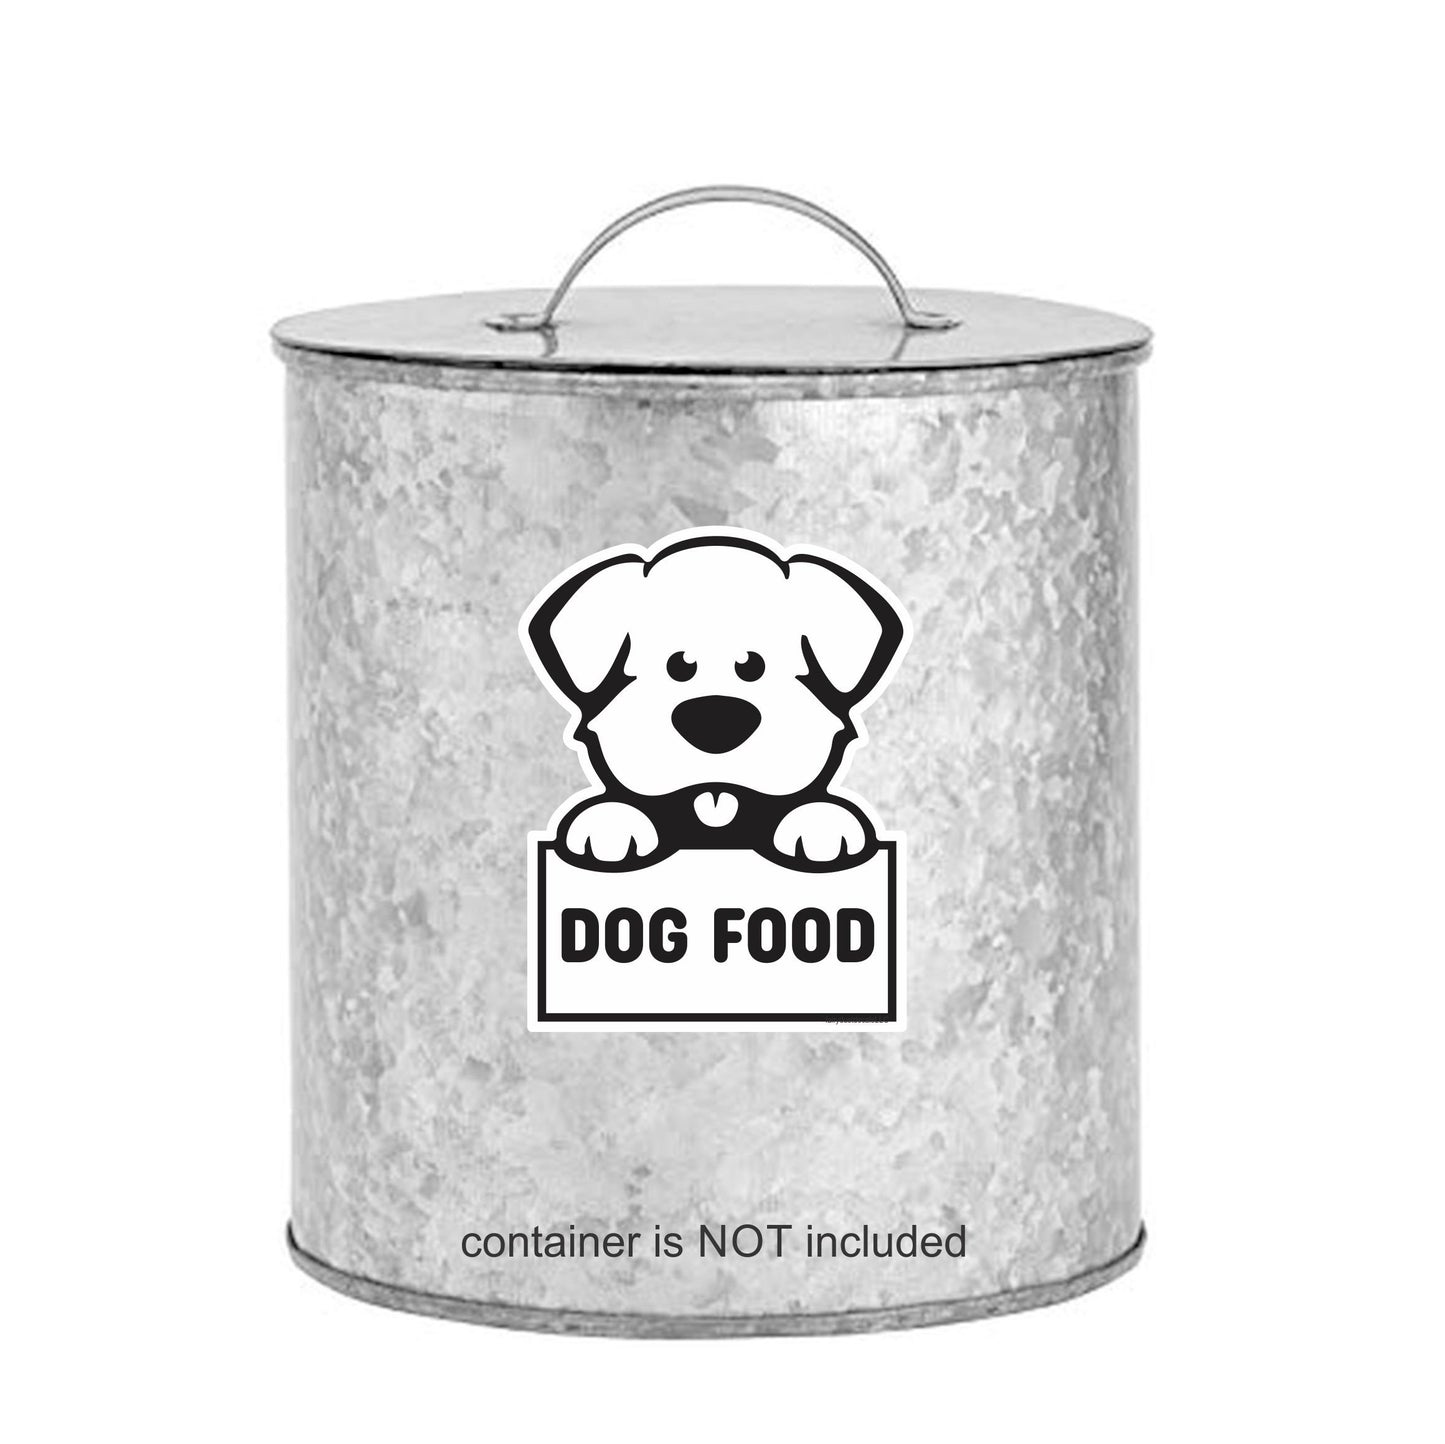 Dog Food Sticker, pet dry food storage label, organized home pantry, dog food container decal measures 5x4 inches